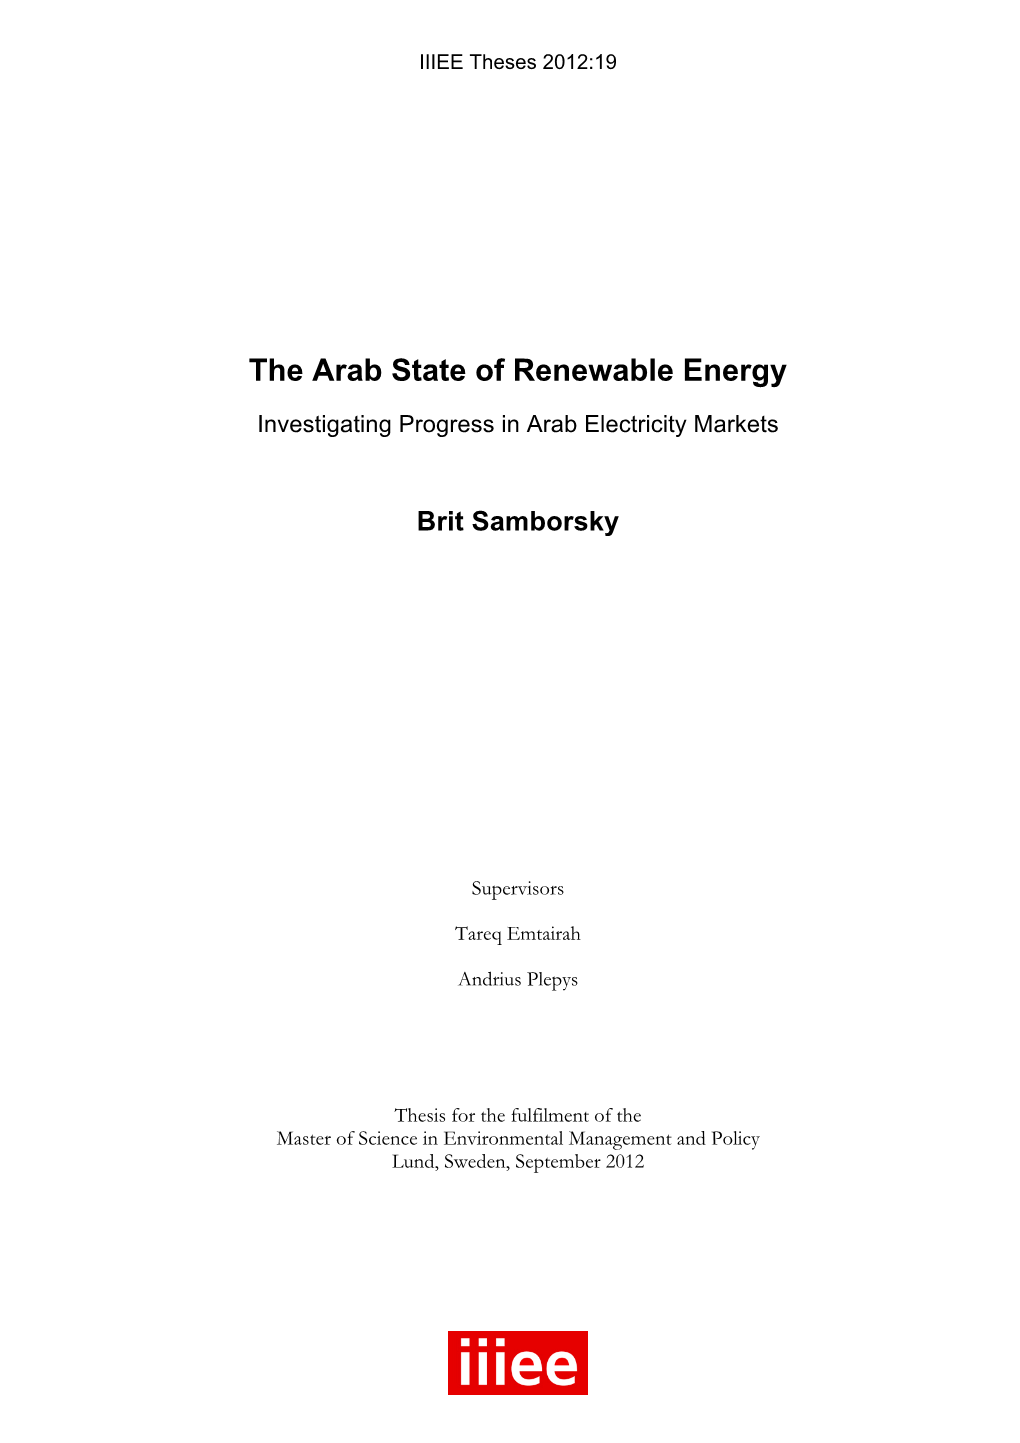 The Arab State of Renewable Energy